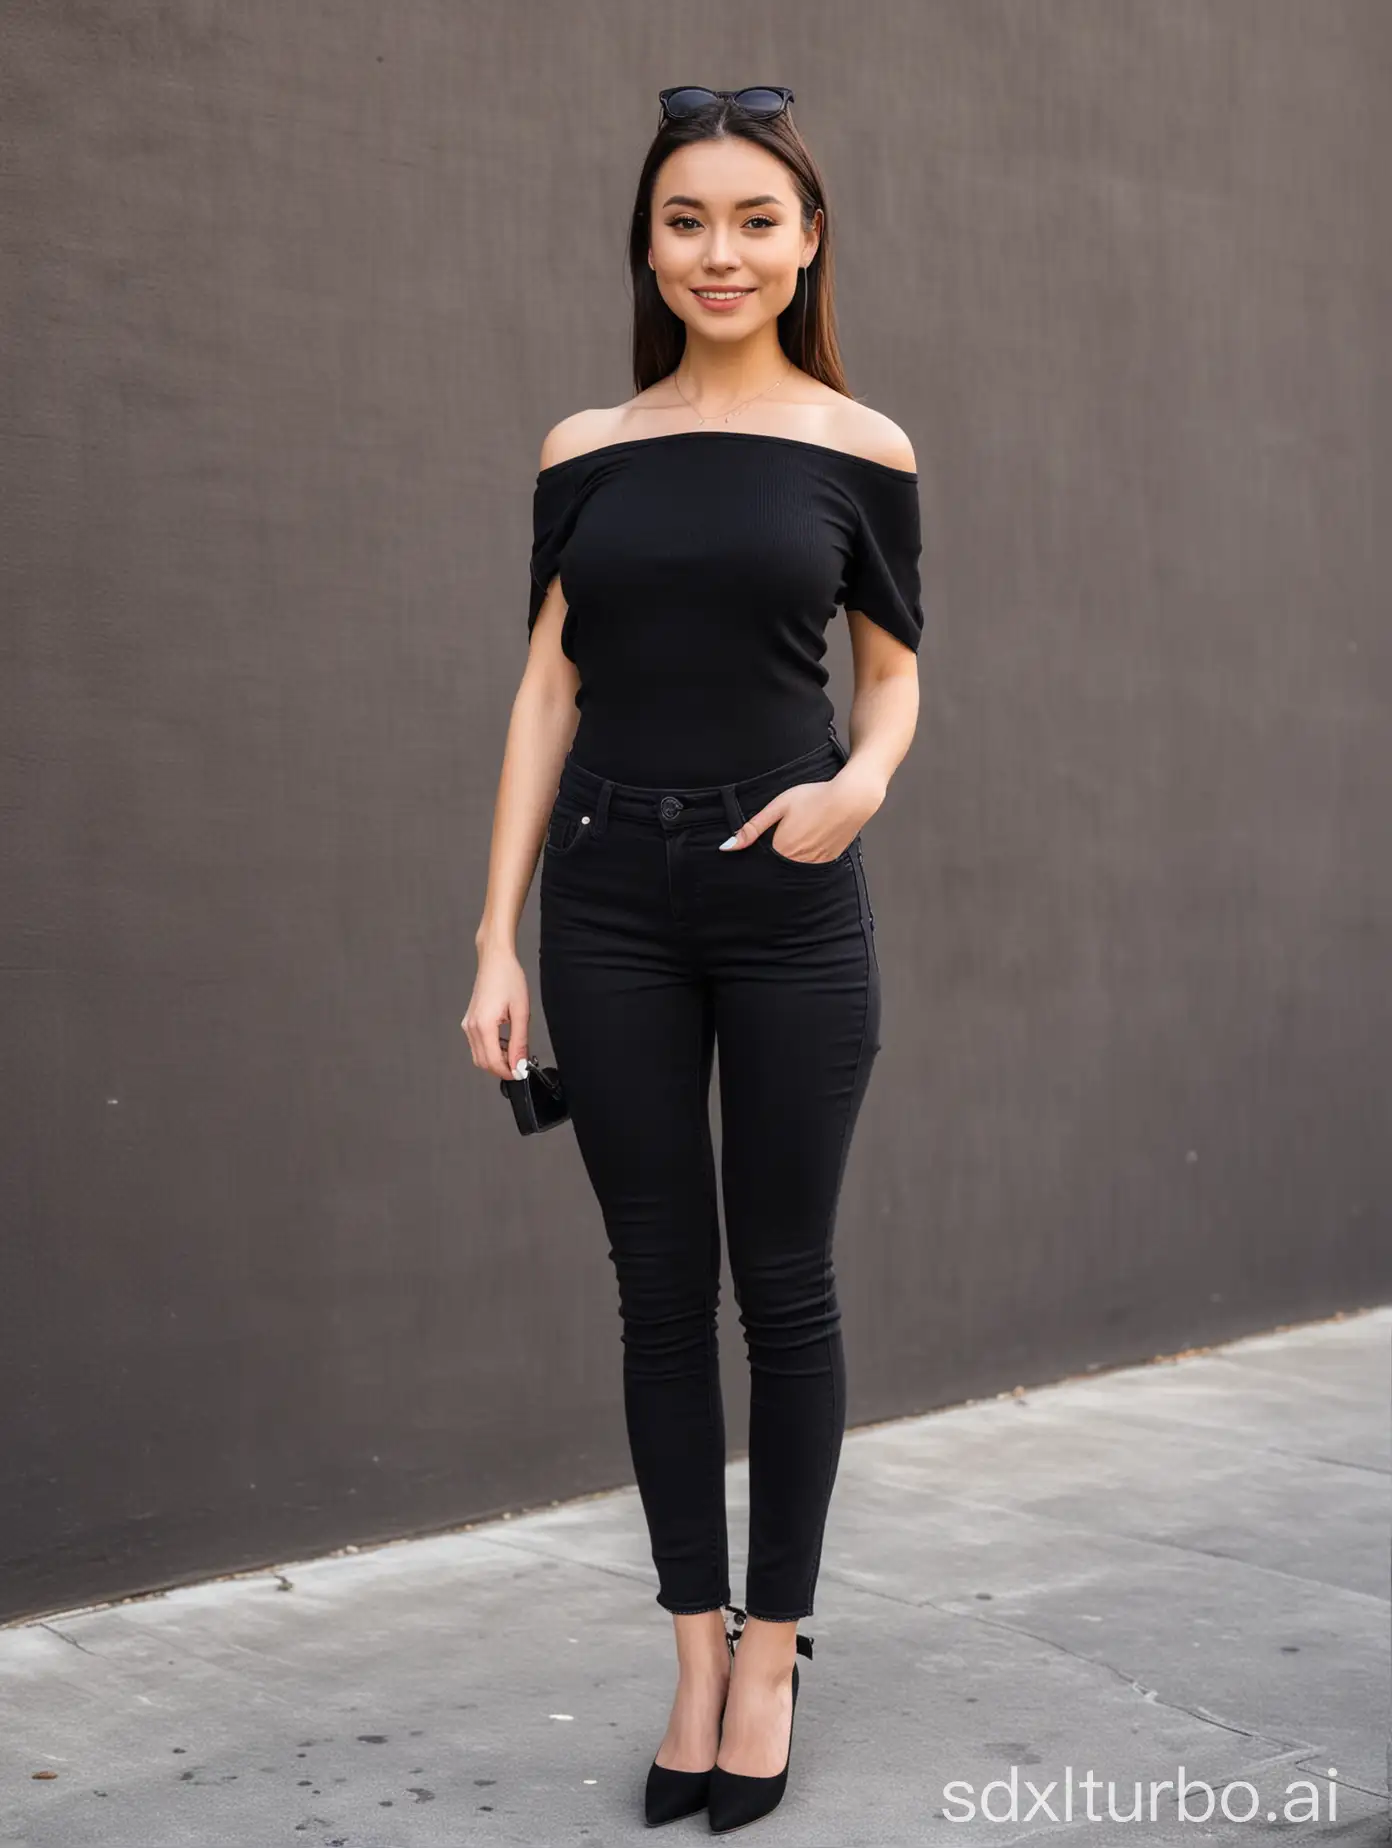 Stylish-Petite-Woman-in-Black-Top-and-Skinny-Jeans